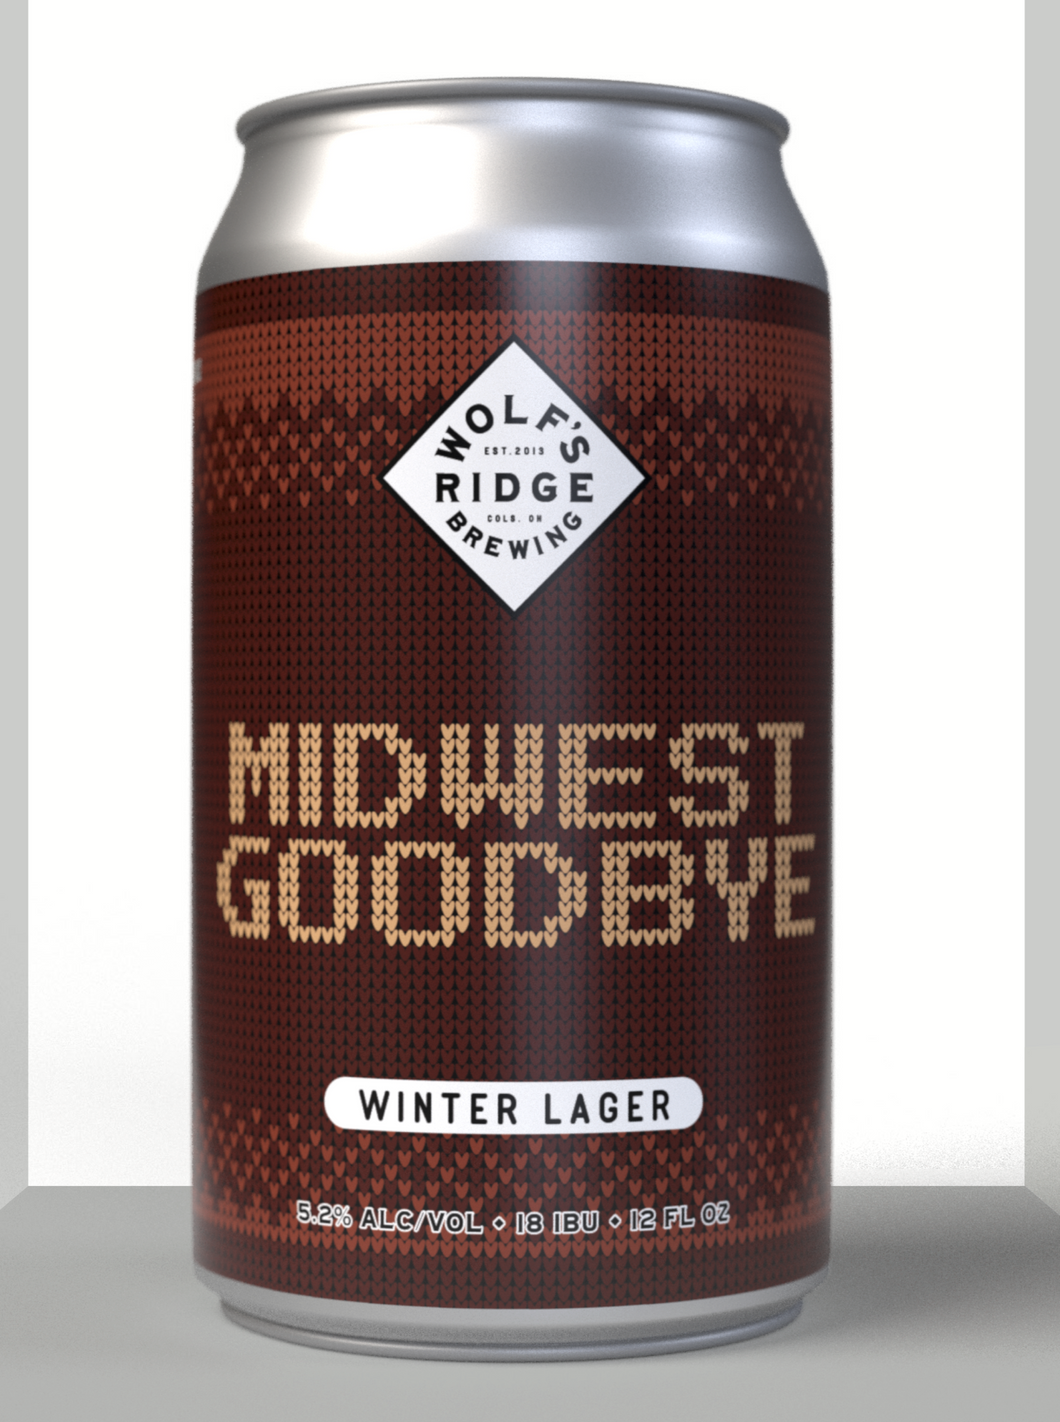 Midwest Goodybe 6-pack